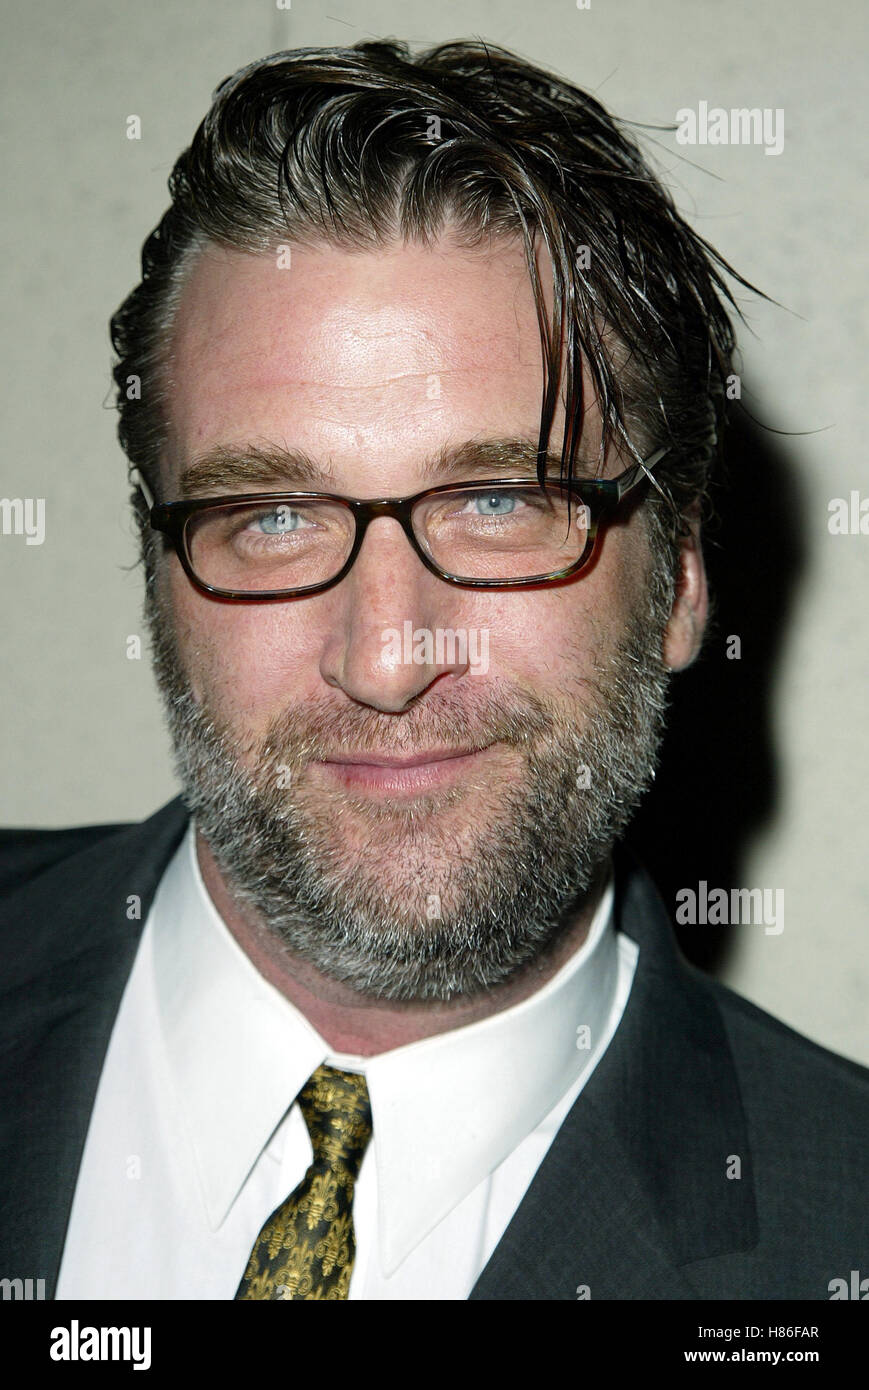 DANIEL BALDWIN NORBY WALTERS HOLIDAY PARTY FRIARS CLUB BEVERLY HILLS LOS ANGELES US 24 November 2002 Stock Photo